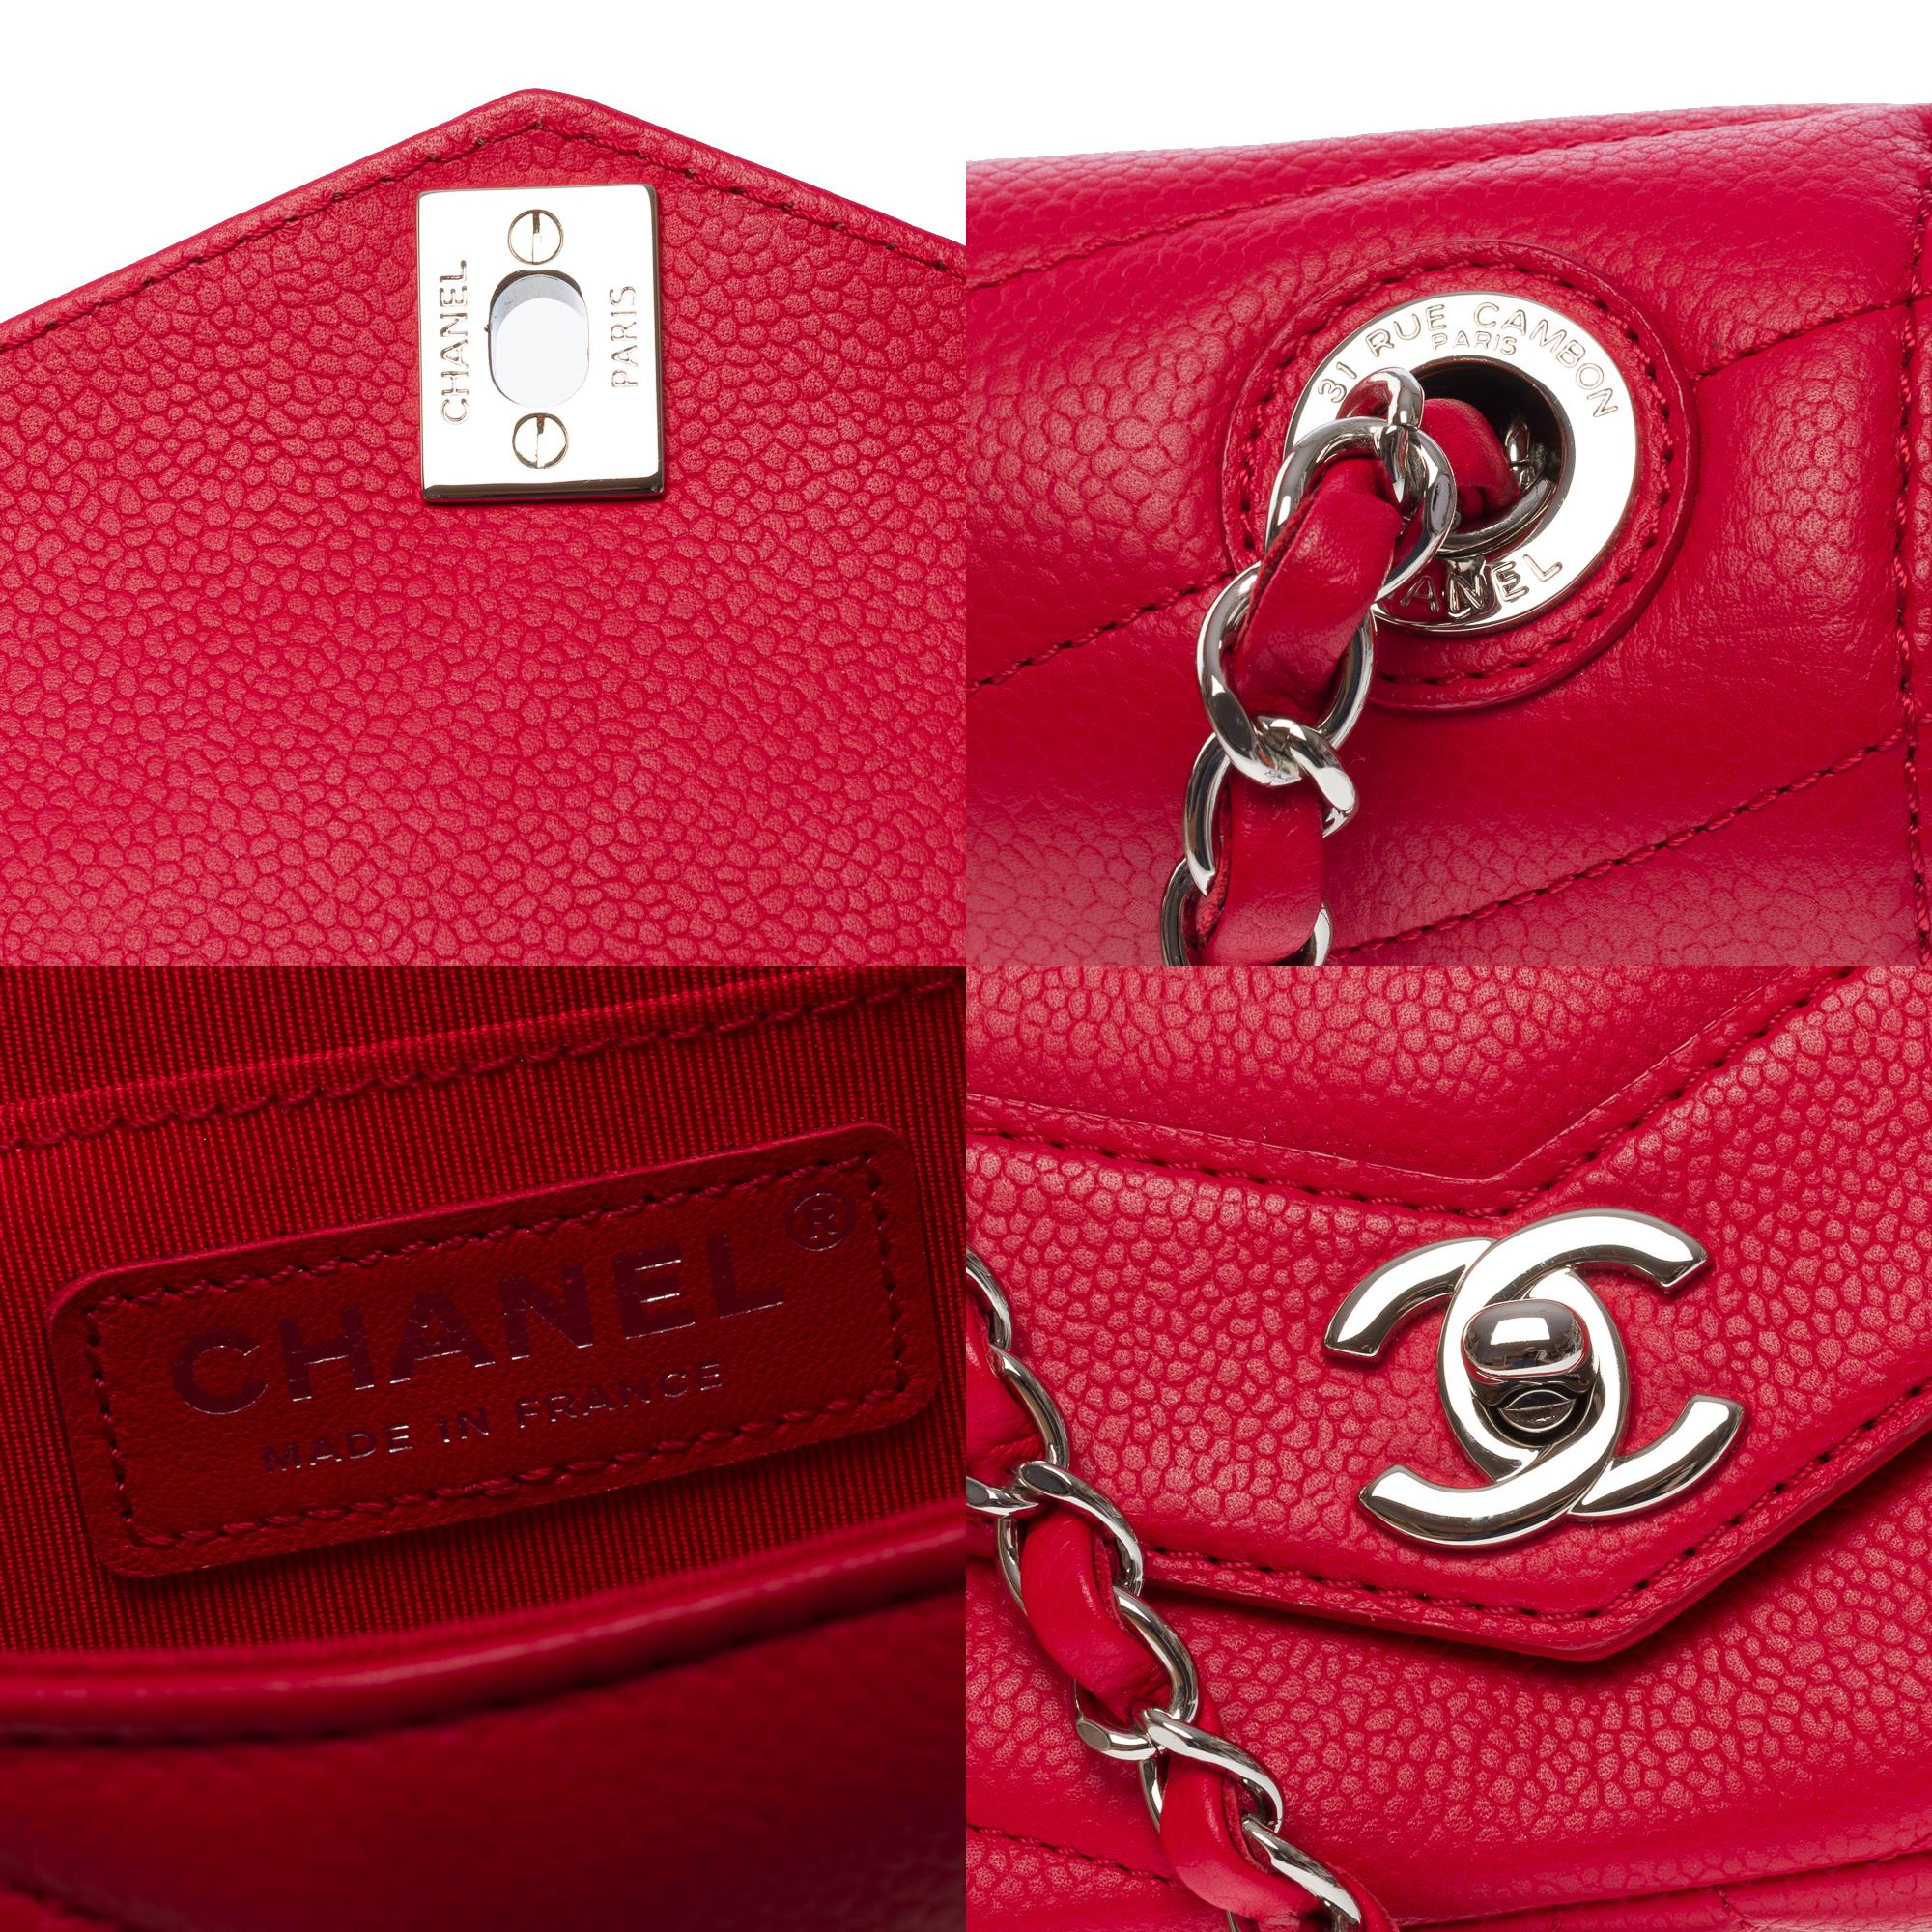 Chanel Mini Timeless shoulder bag in red herringbone quilted caviar leather, SHW For Sale 2